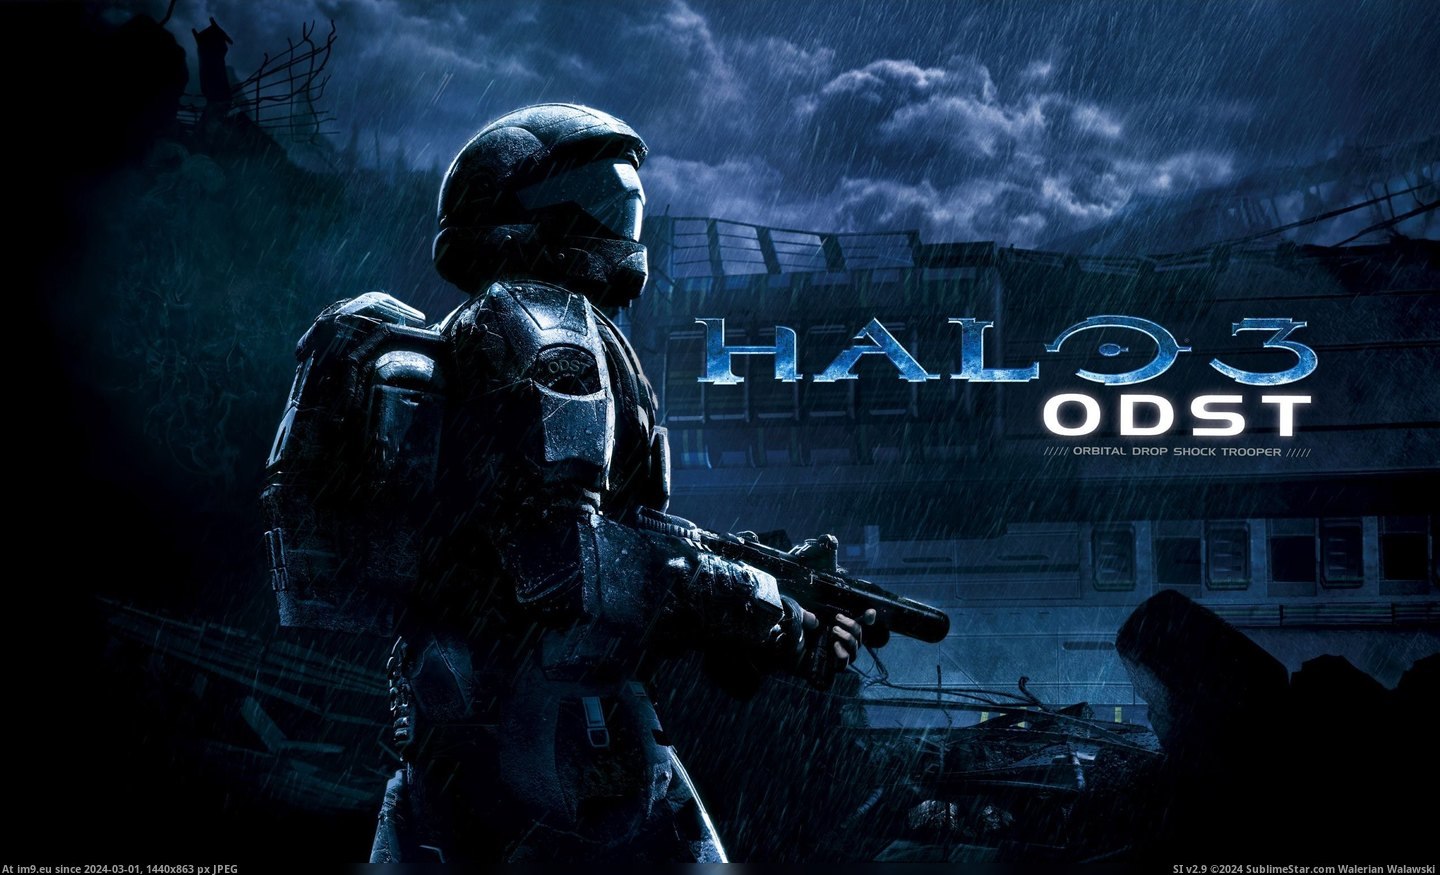 #Game #Halo #Video Video Game Halo 75123 Pic. (Image of album Games Wallpapers))